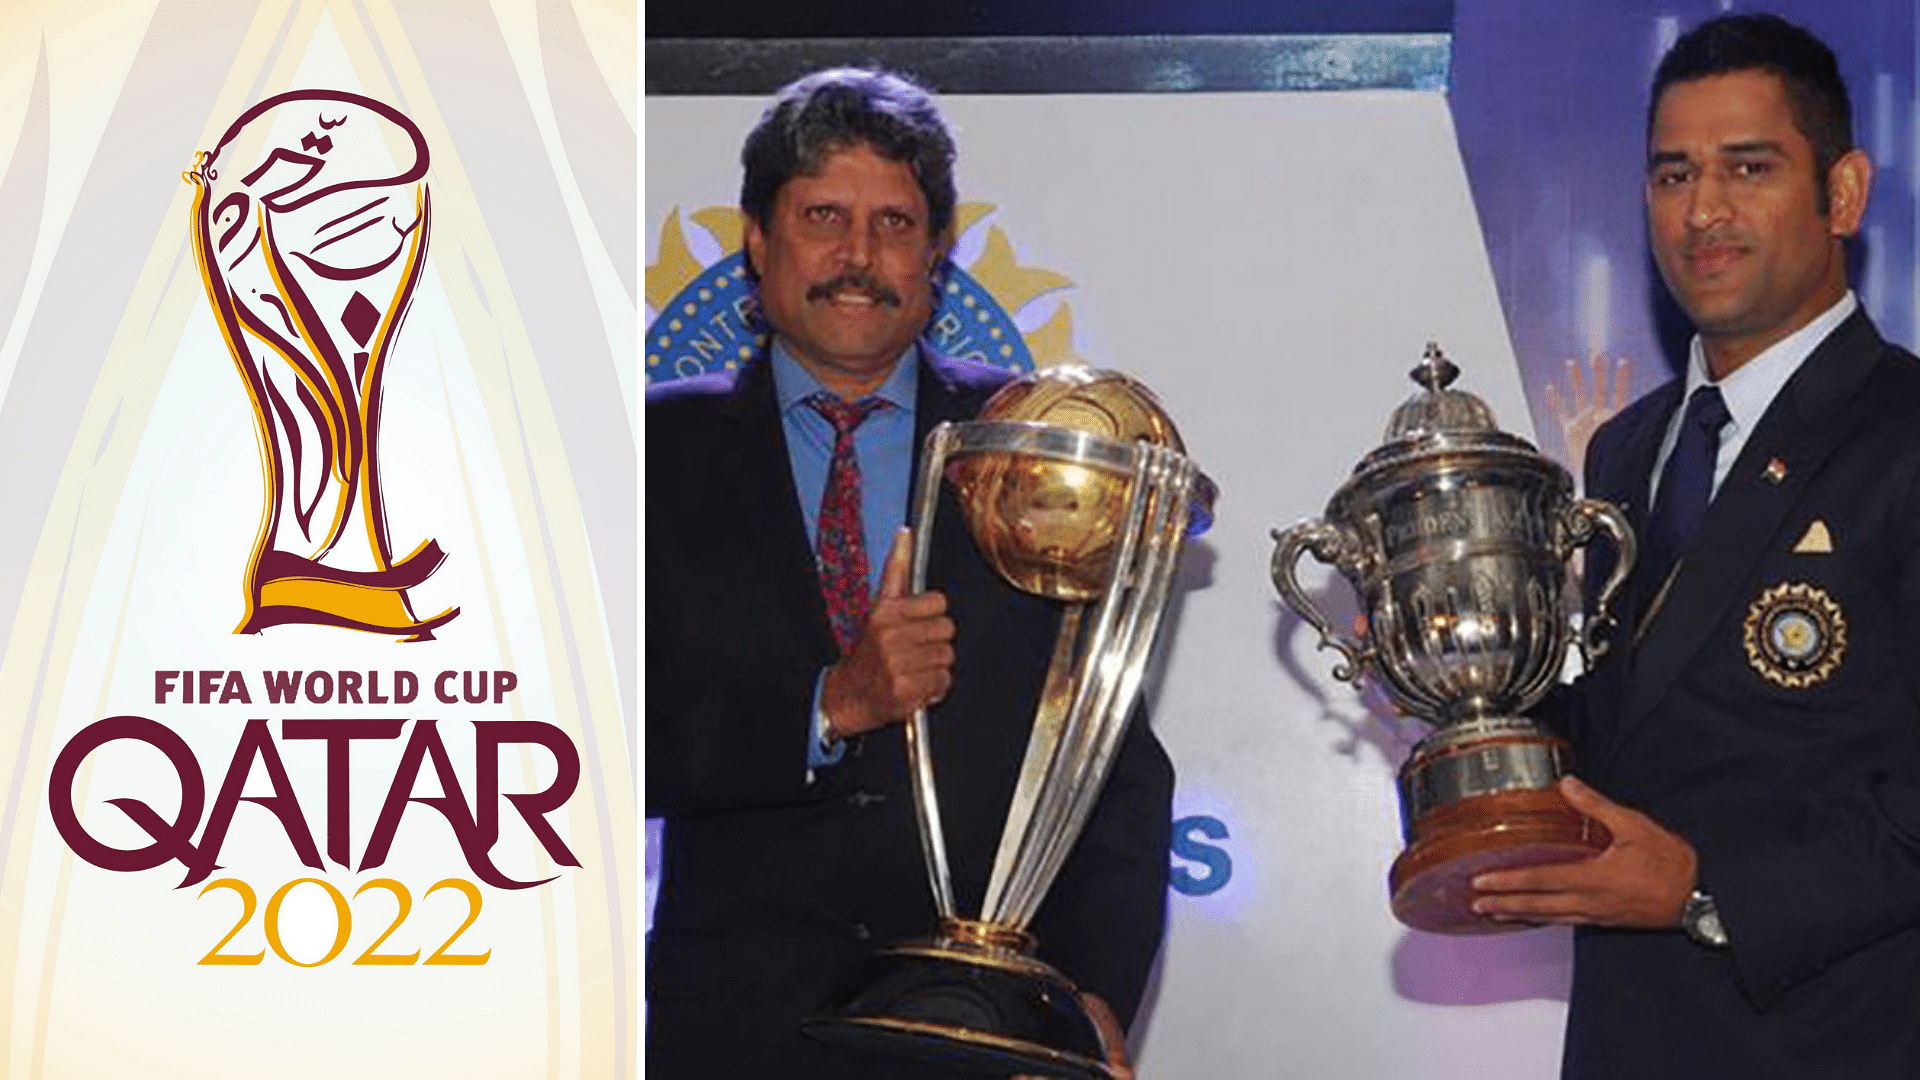 Organisers of the 2022 FIFA World Cup in Qatar have invited India’s Cricket World Cup-winning teams of 1983 and 2011 to the event.